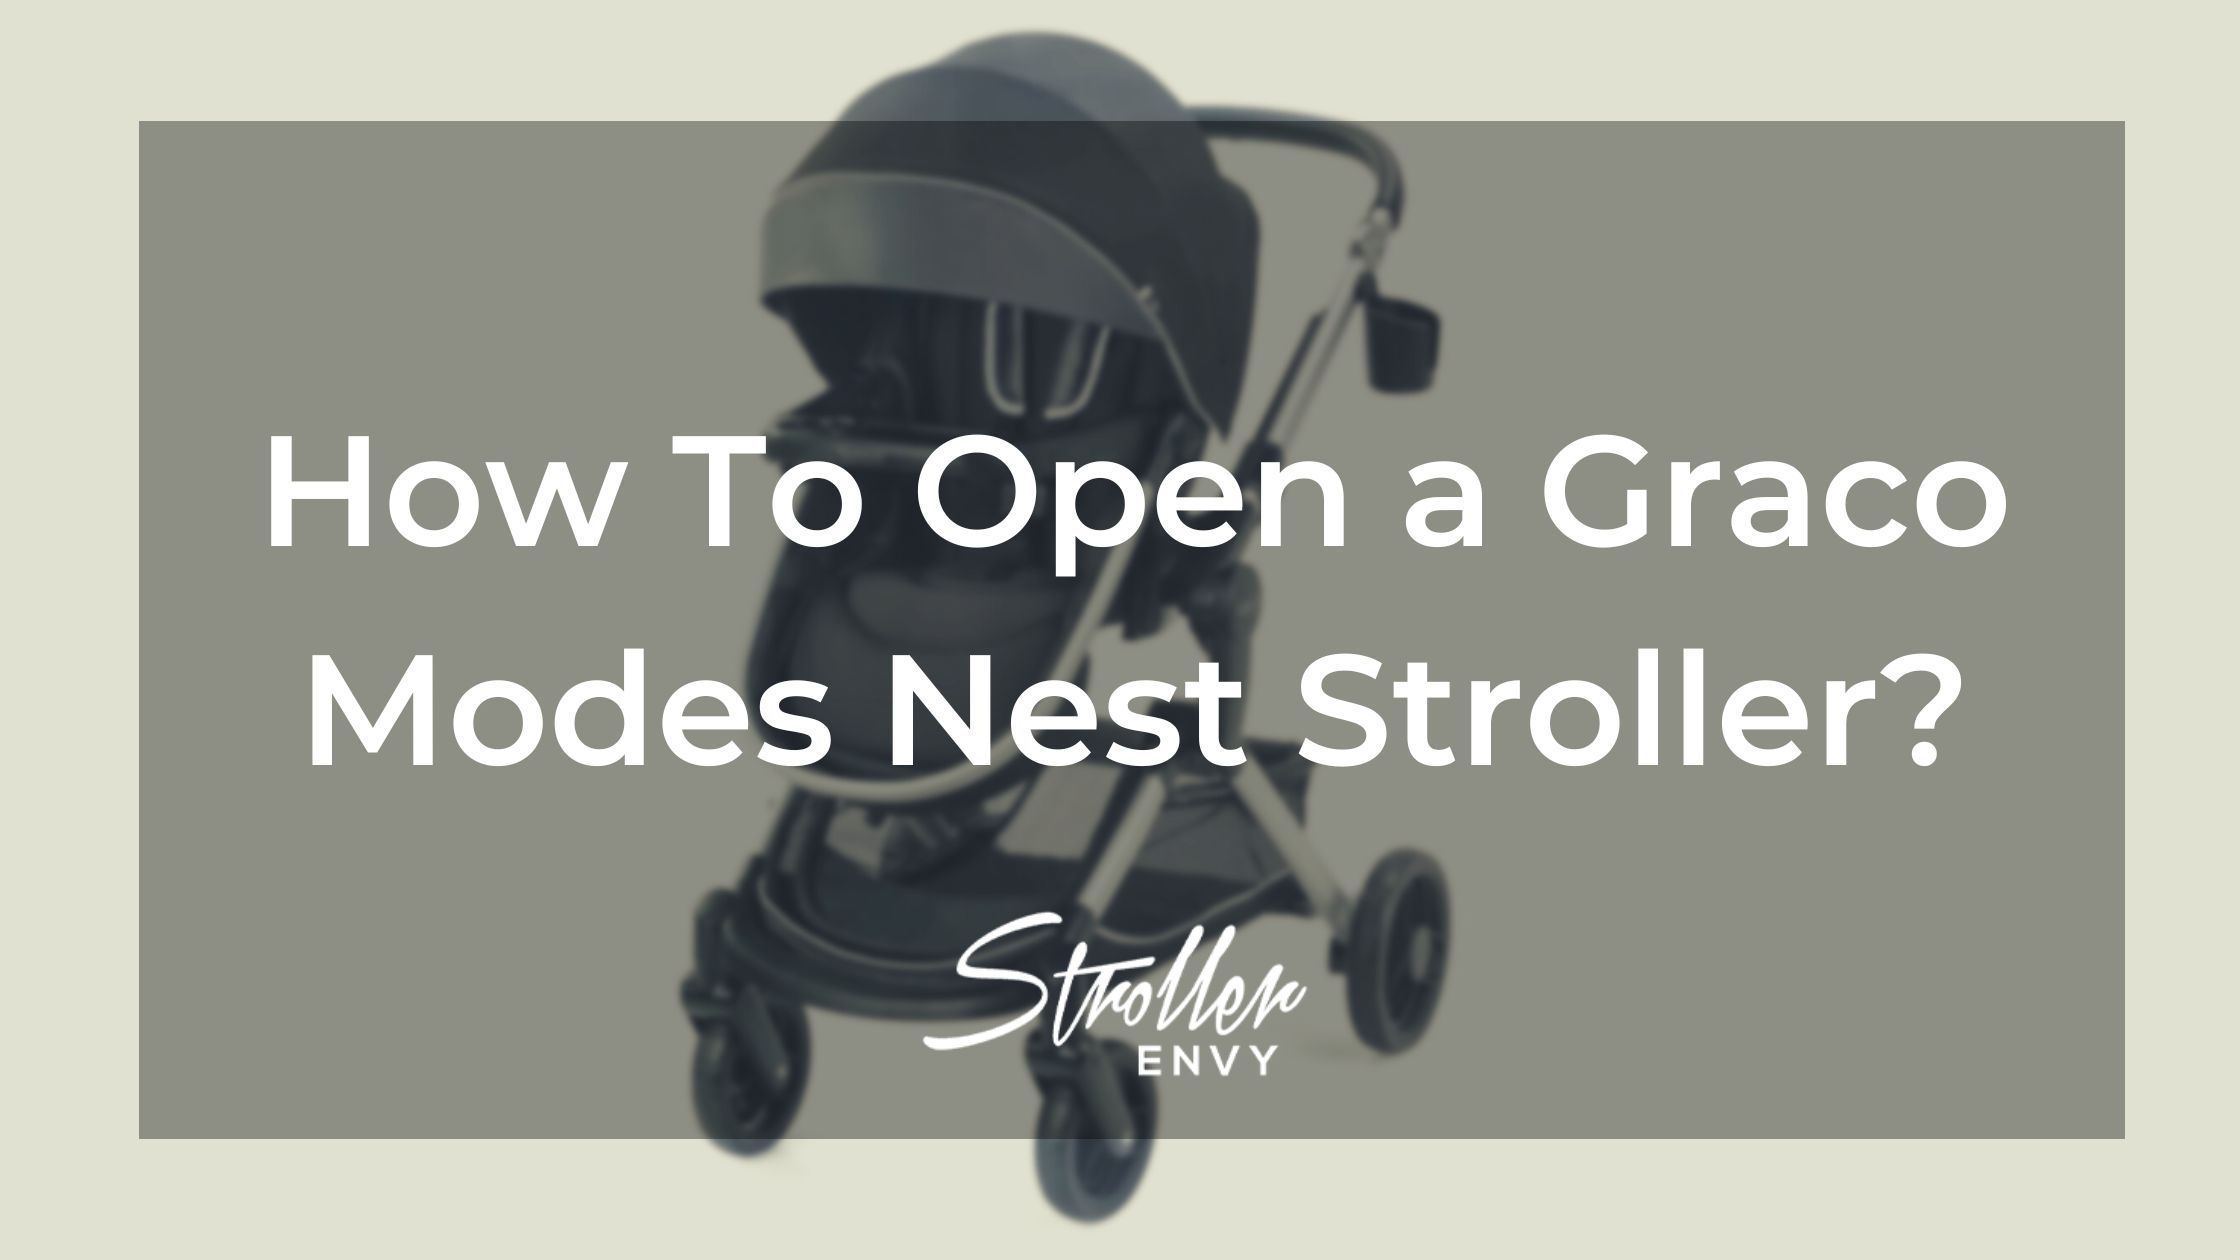 How To Open a Graco Modes Nest Stroller?